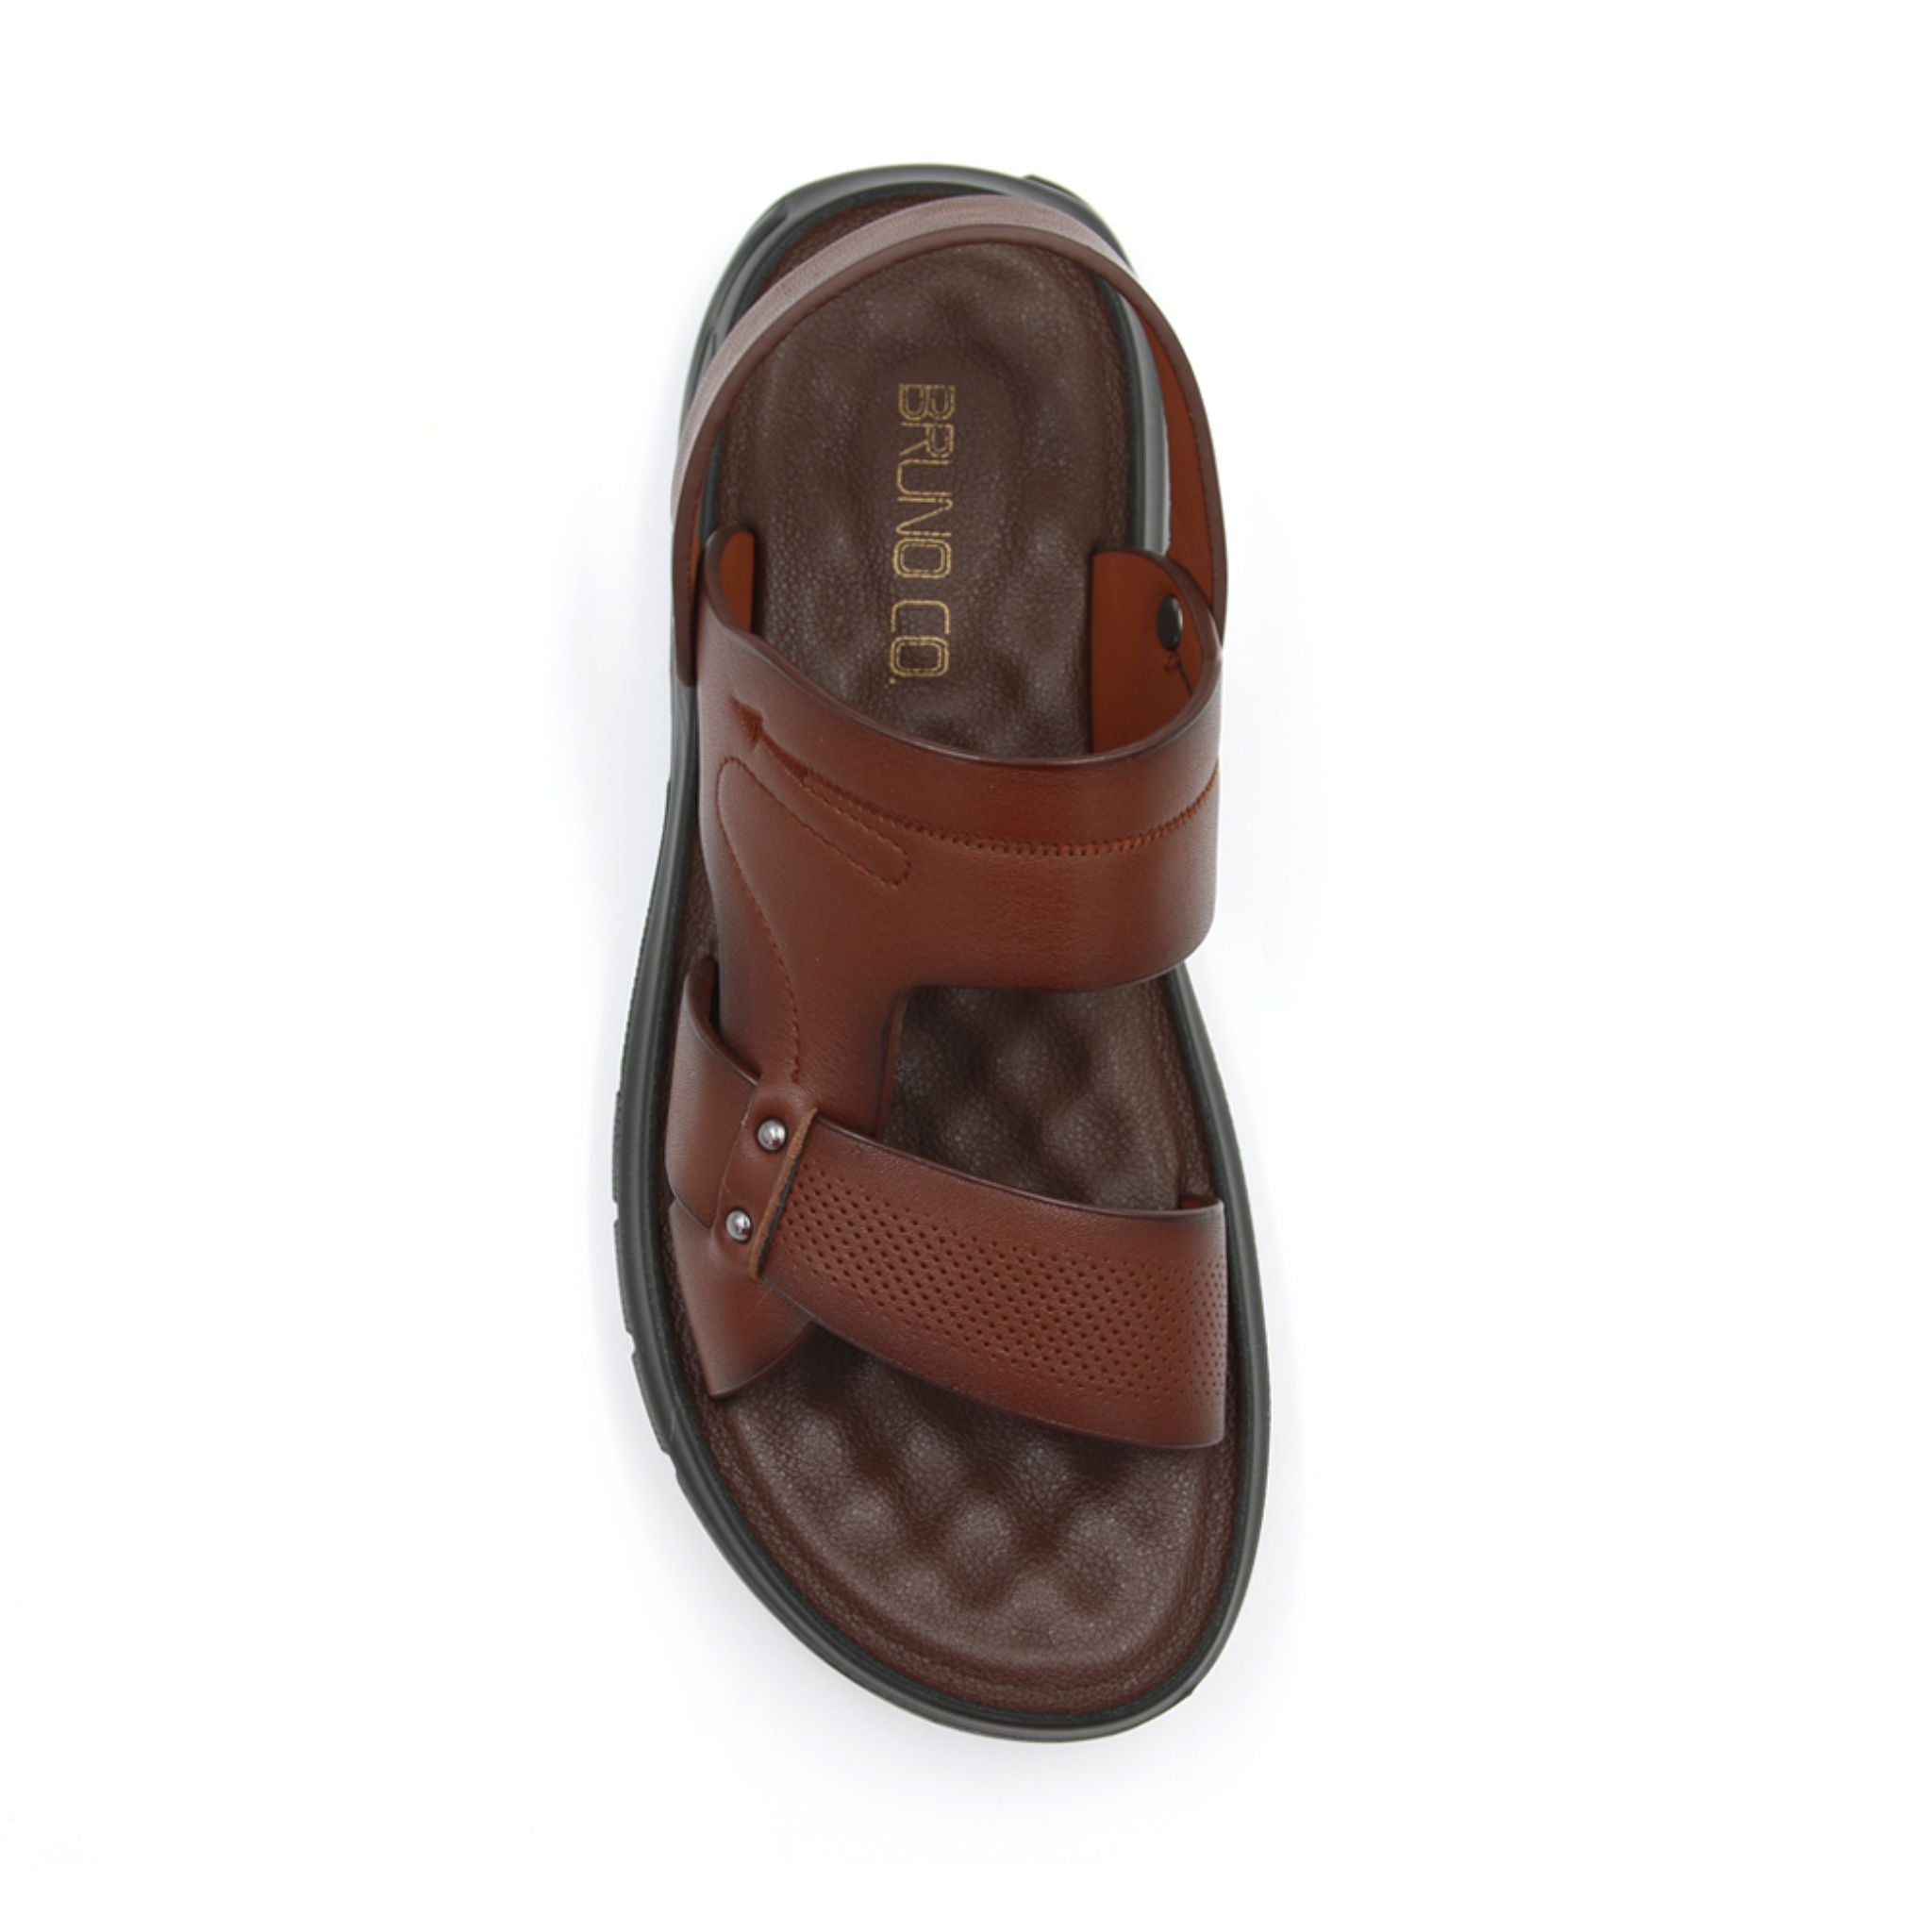 Bruno Co. Don Leather Sandals - Brown